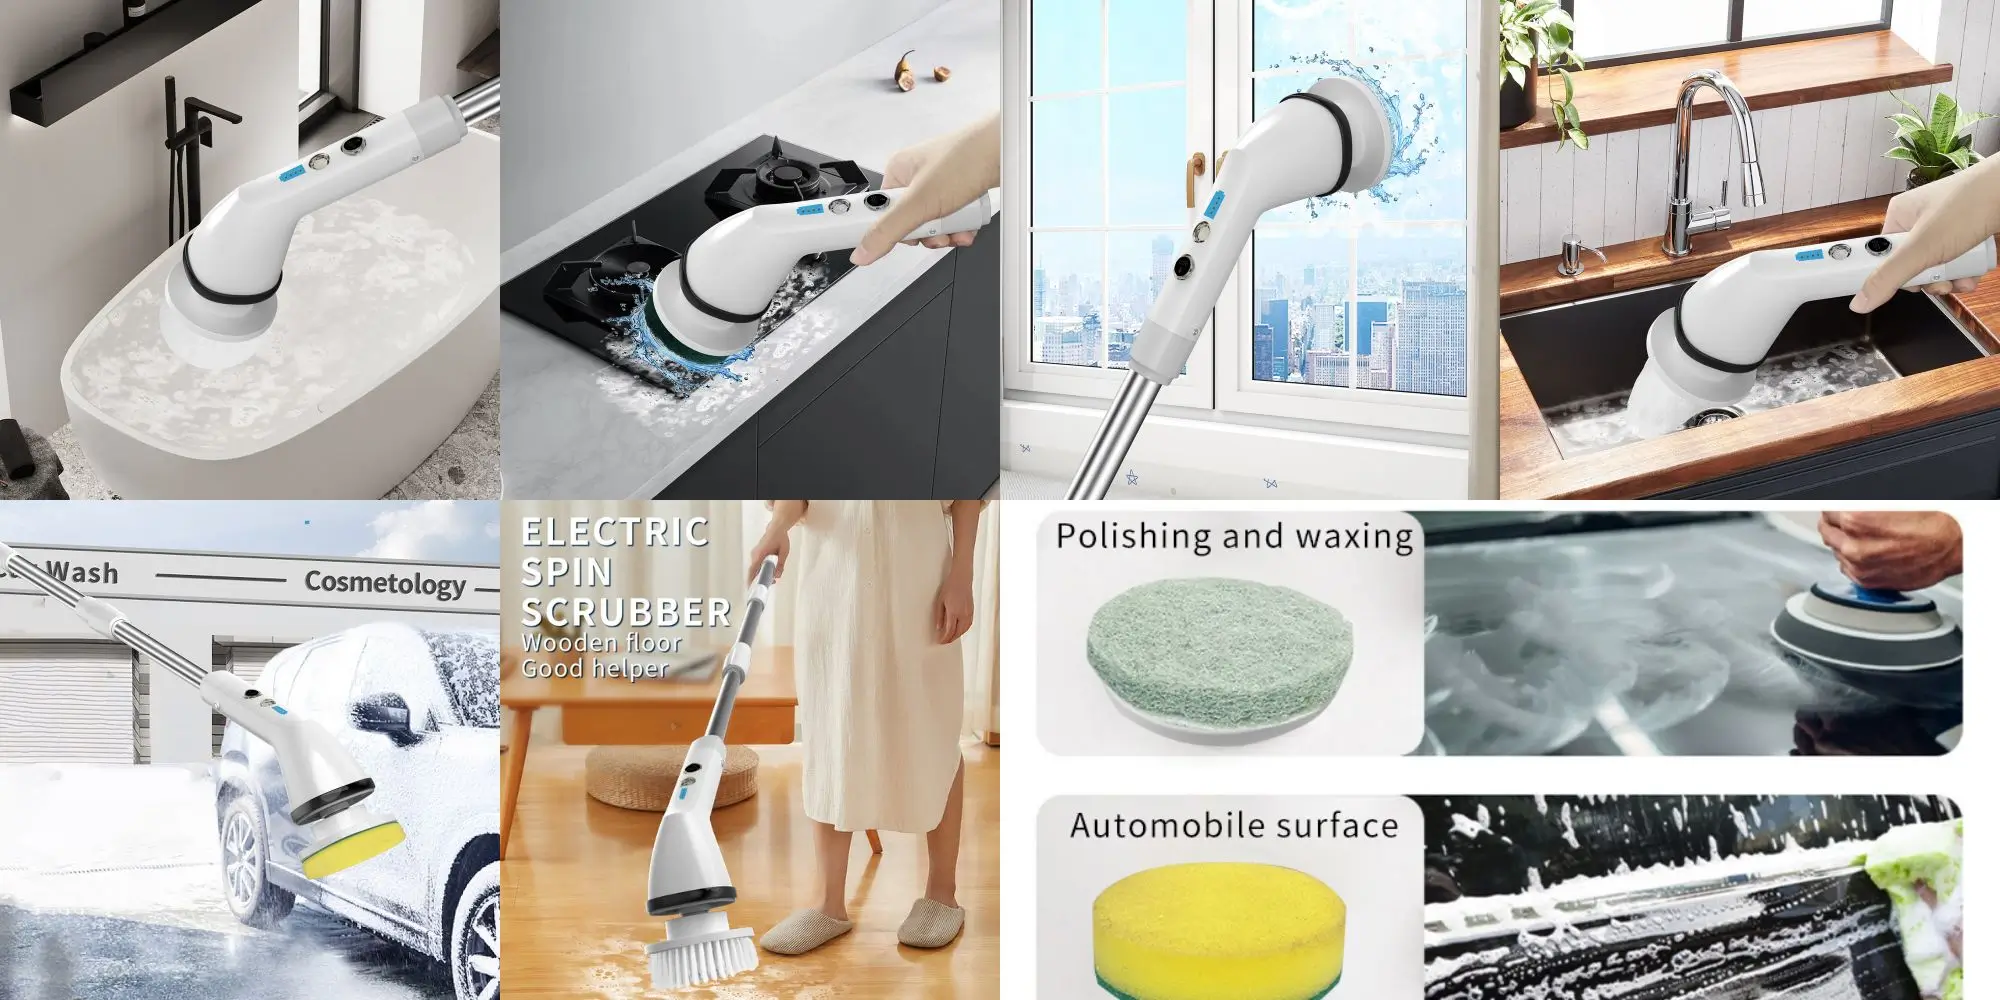 China Wholesale Rechargeable Cordless Electric Spin Scrubber S1 with 6 Replaceable Brush Heads and Adjustable Extension Handle, Power Brush Shower Scrubber for Bathroom, Bathtub, Kitchen, Car, Tile, Wall, Floor - Electric Spin Scrubber - 1